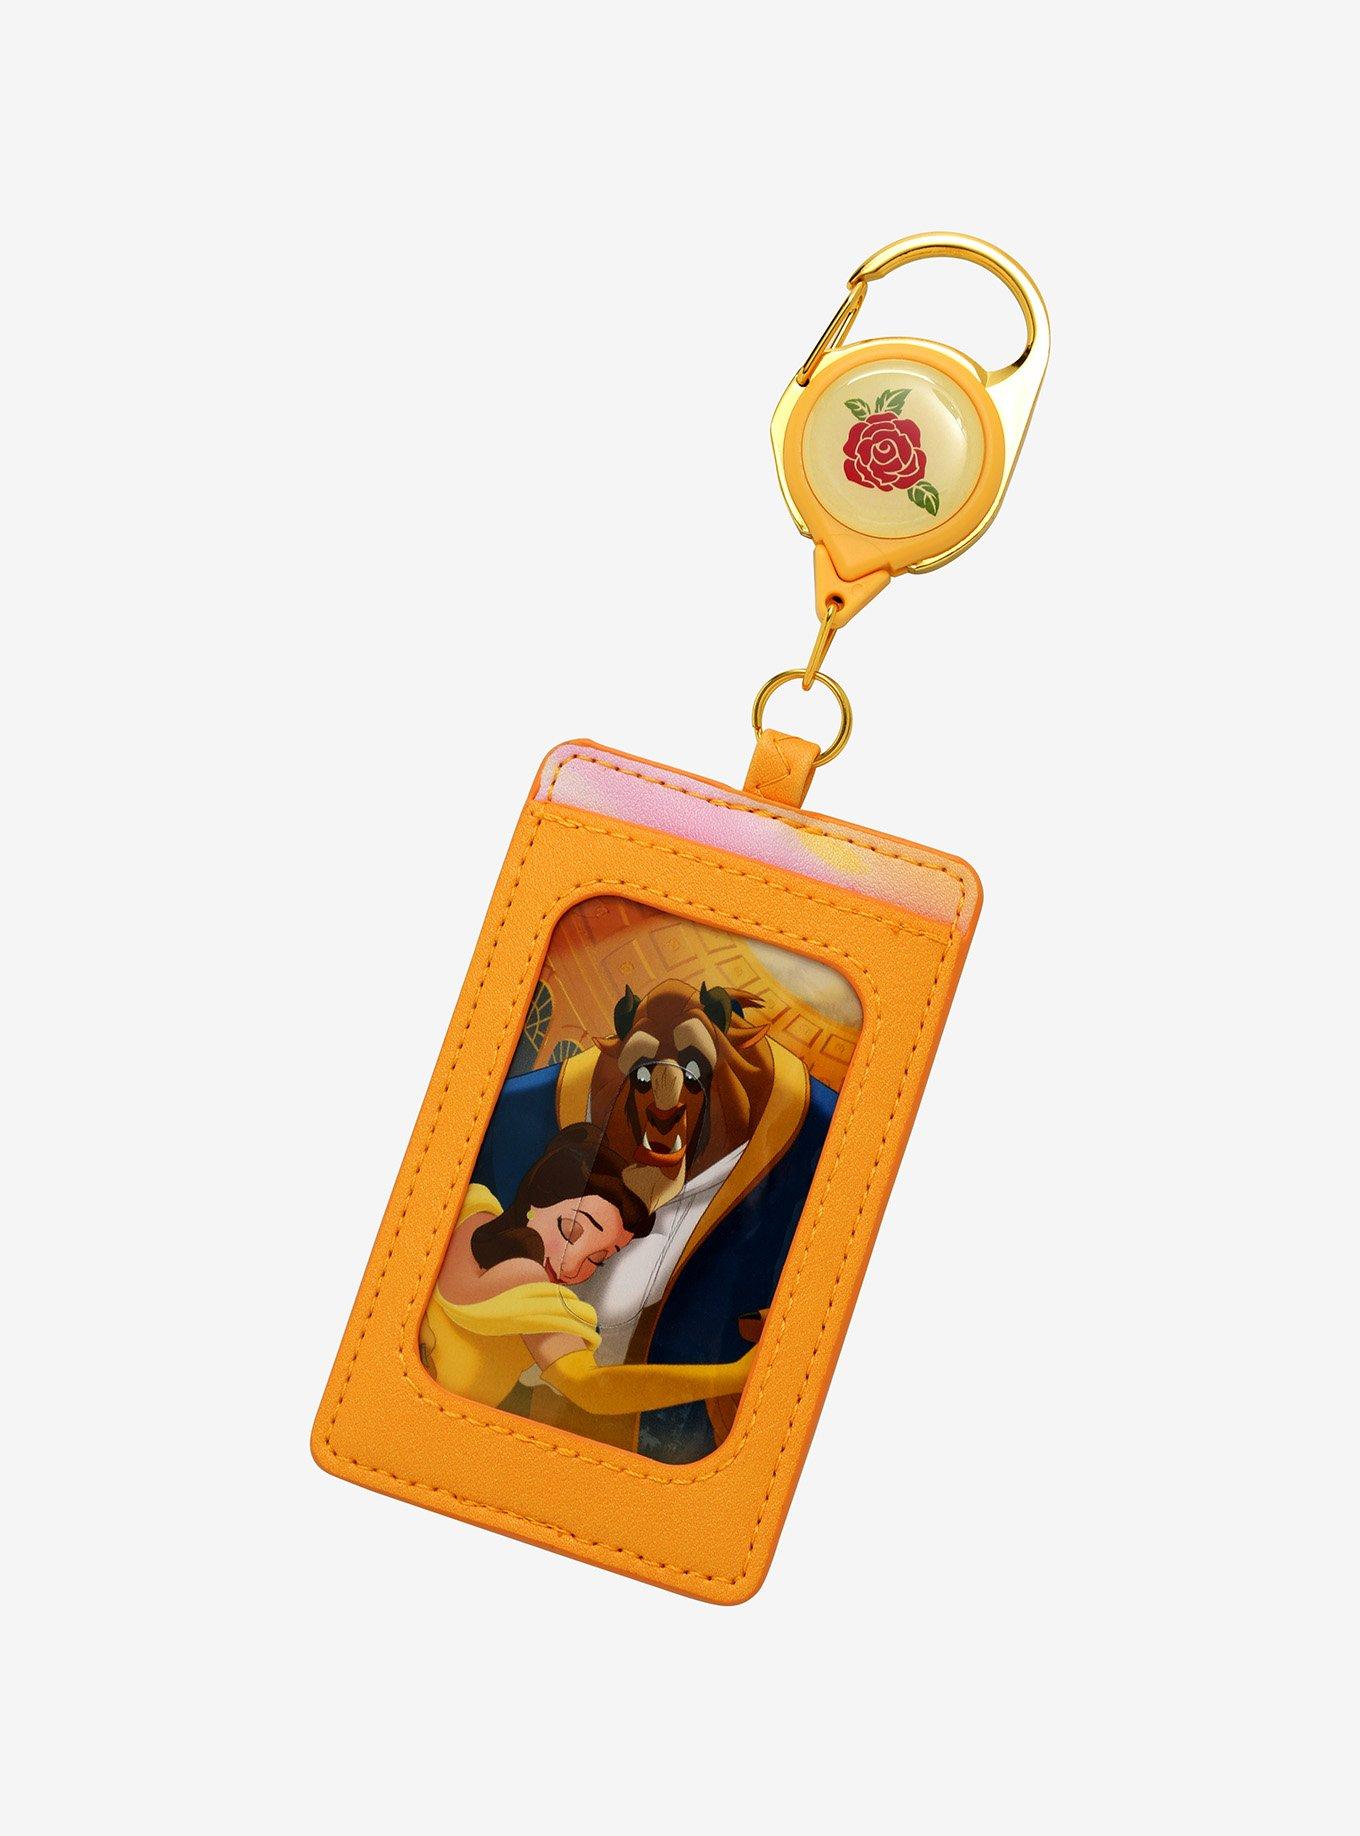 Buckle Up Buttercup Hotel Key Chain, BoxLunch